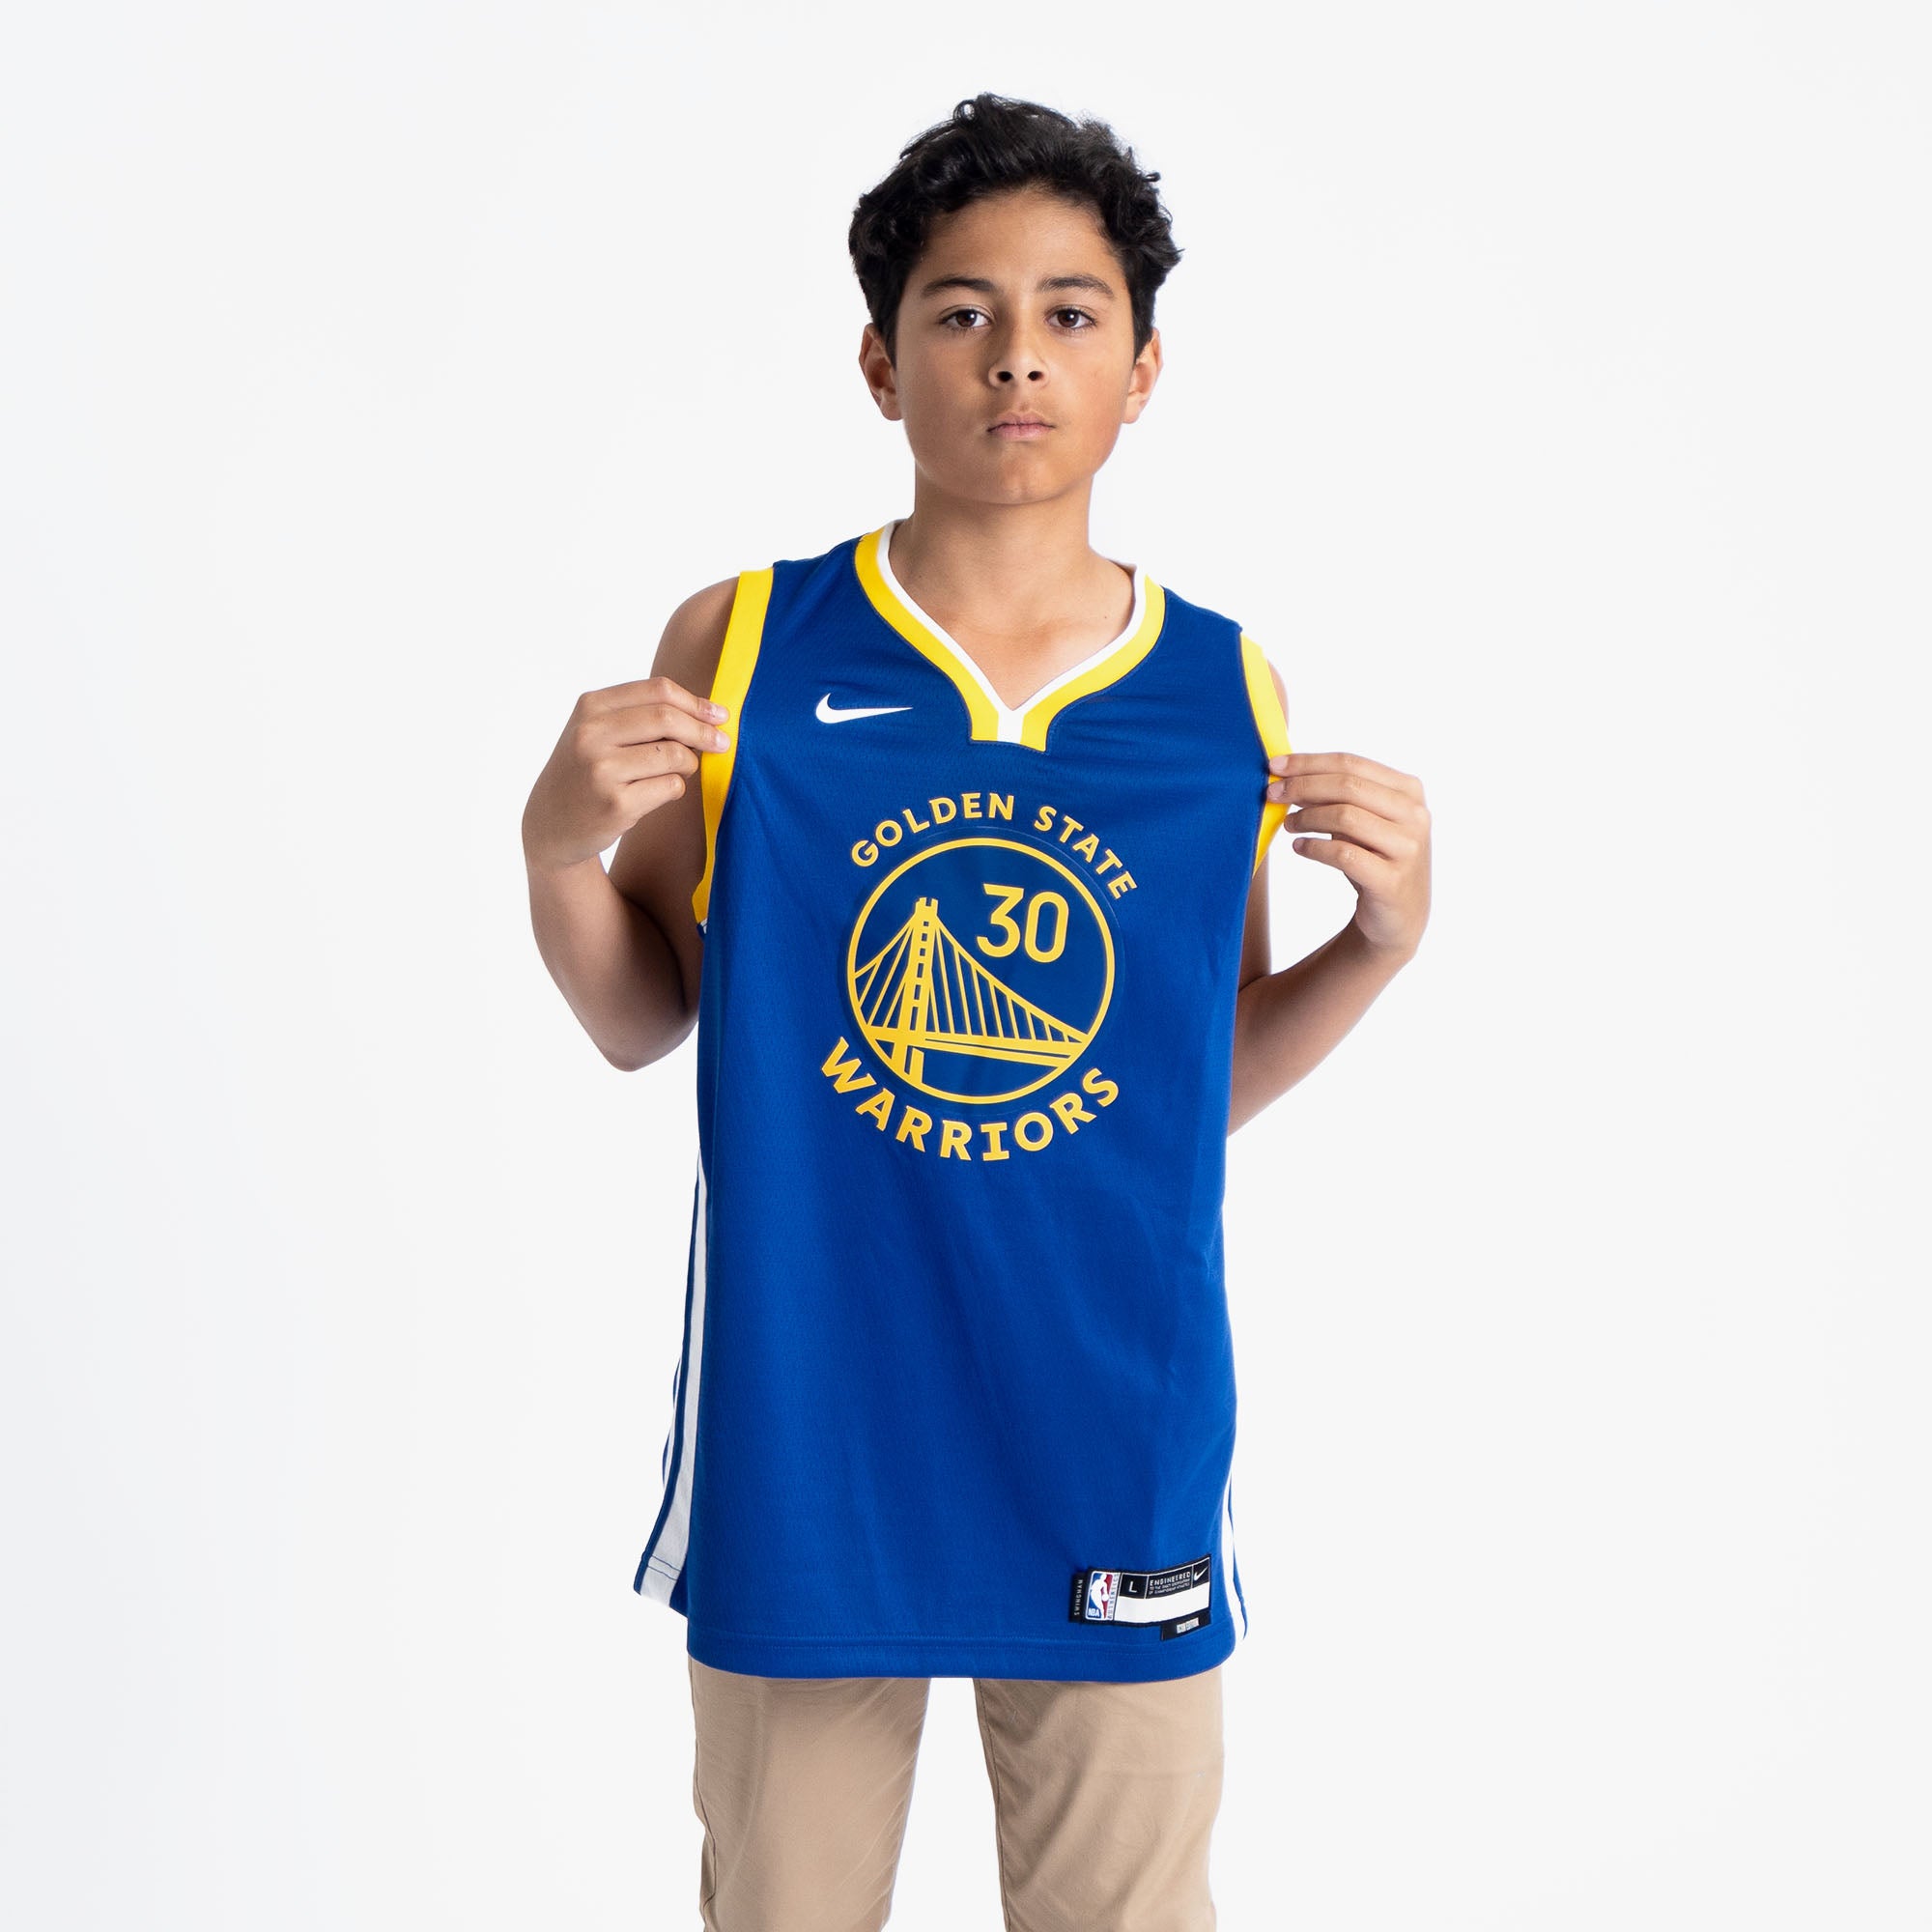 Steph Curry Size Medium (10-12) Youth Jersey